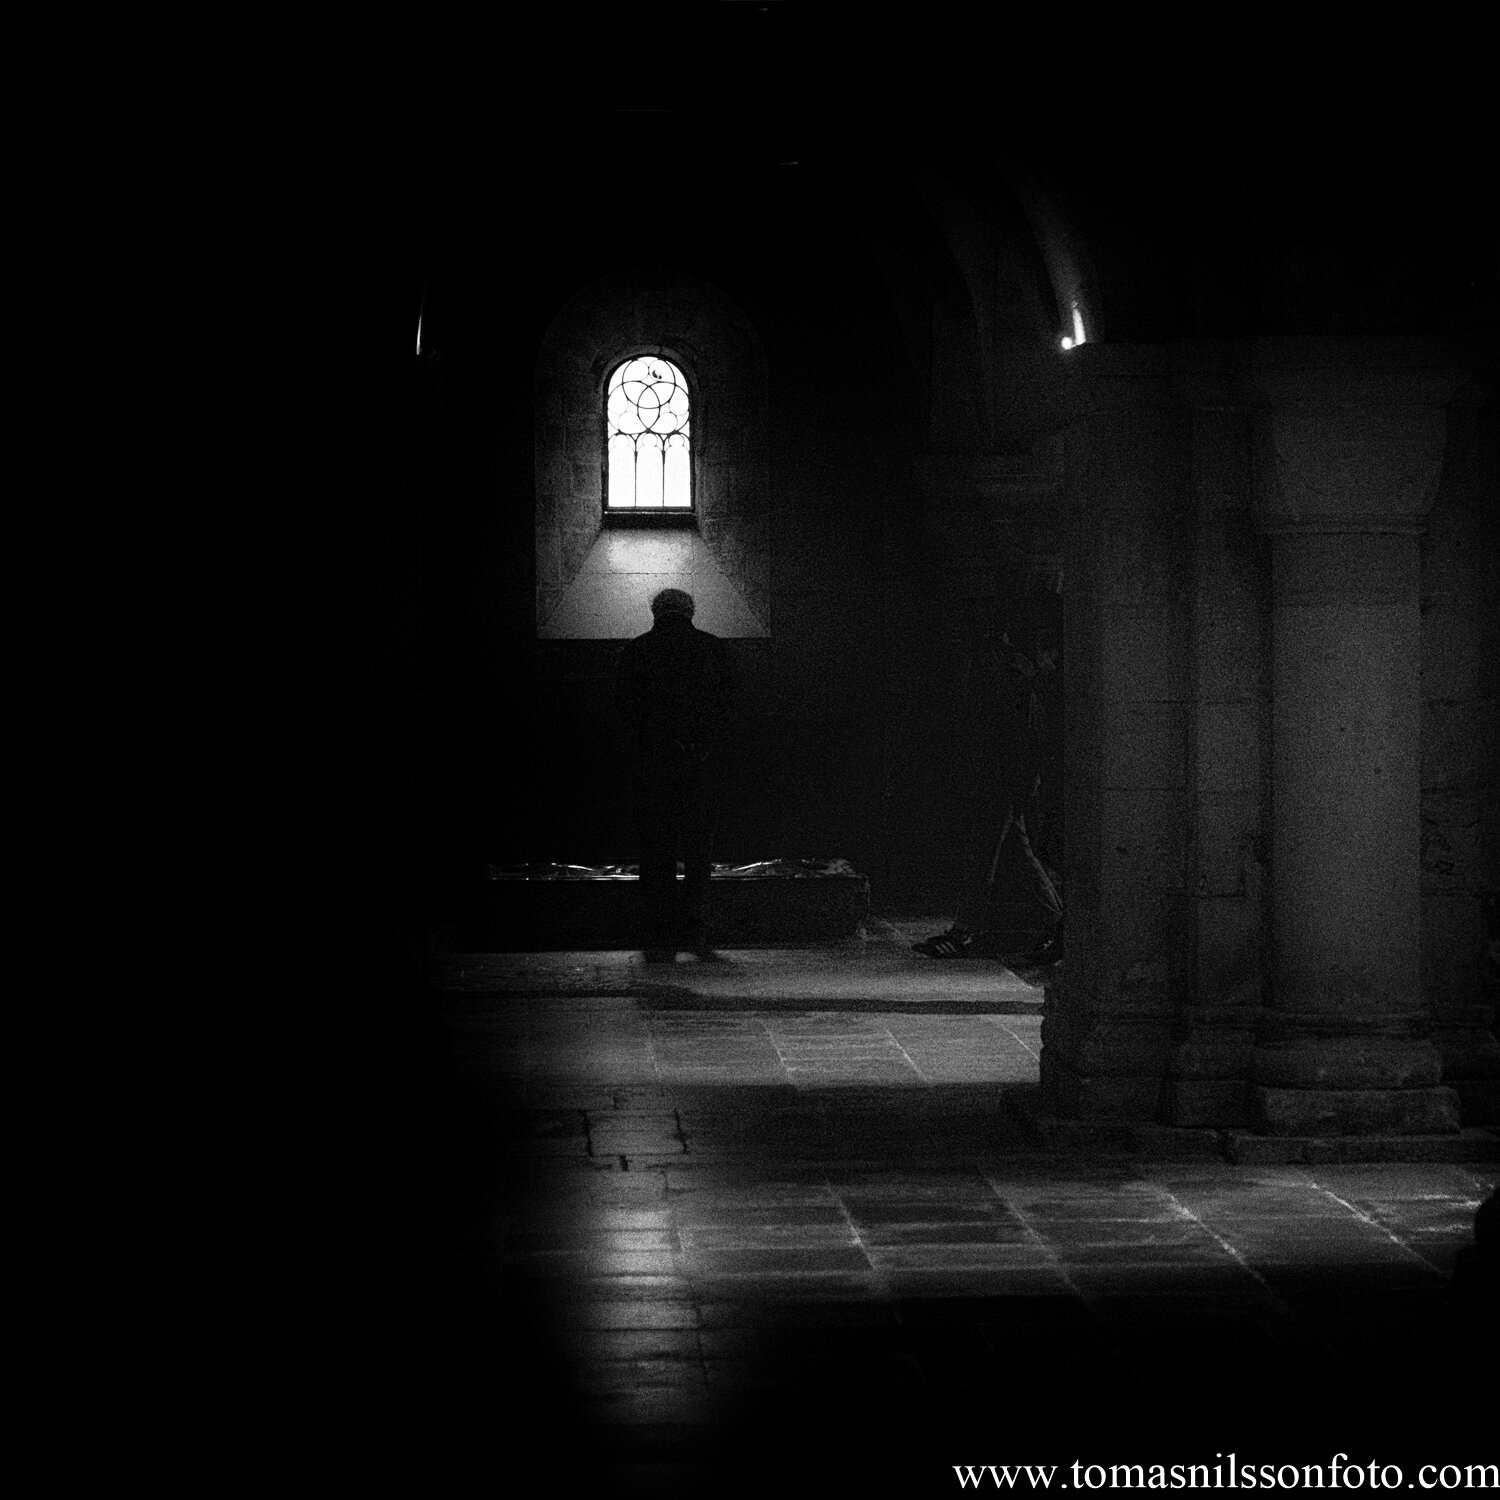 Day 304 - October 31: A Ghost in the Crypt